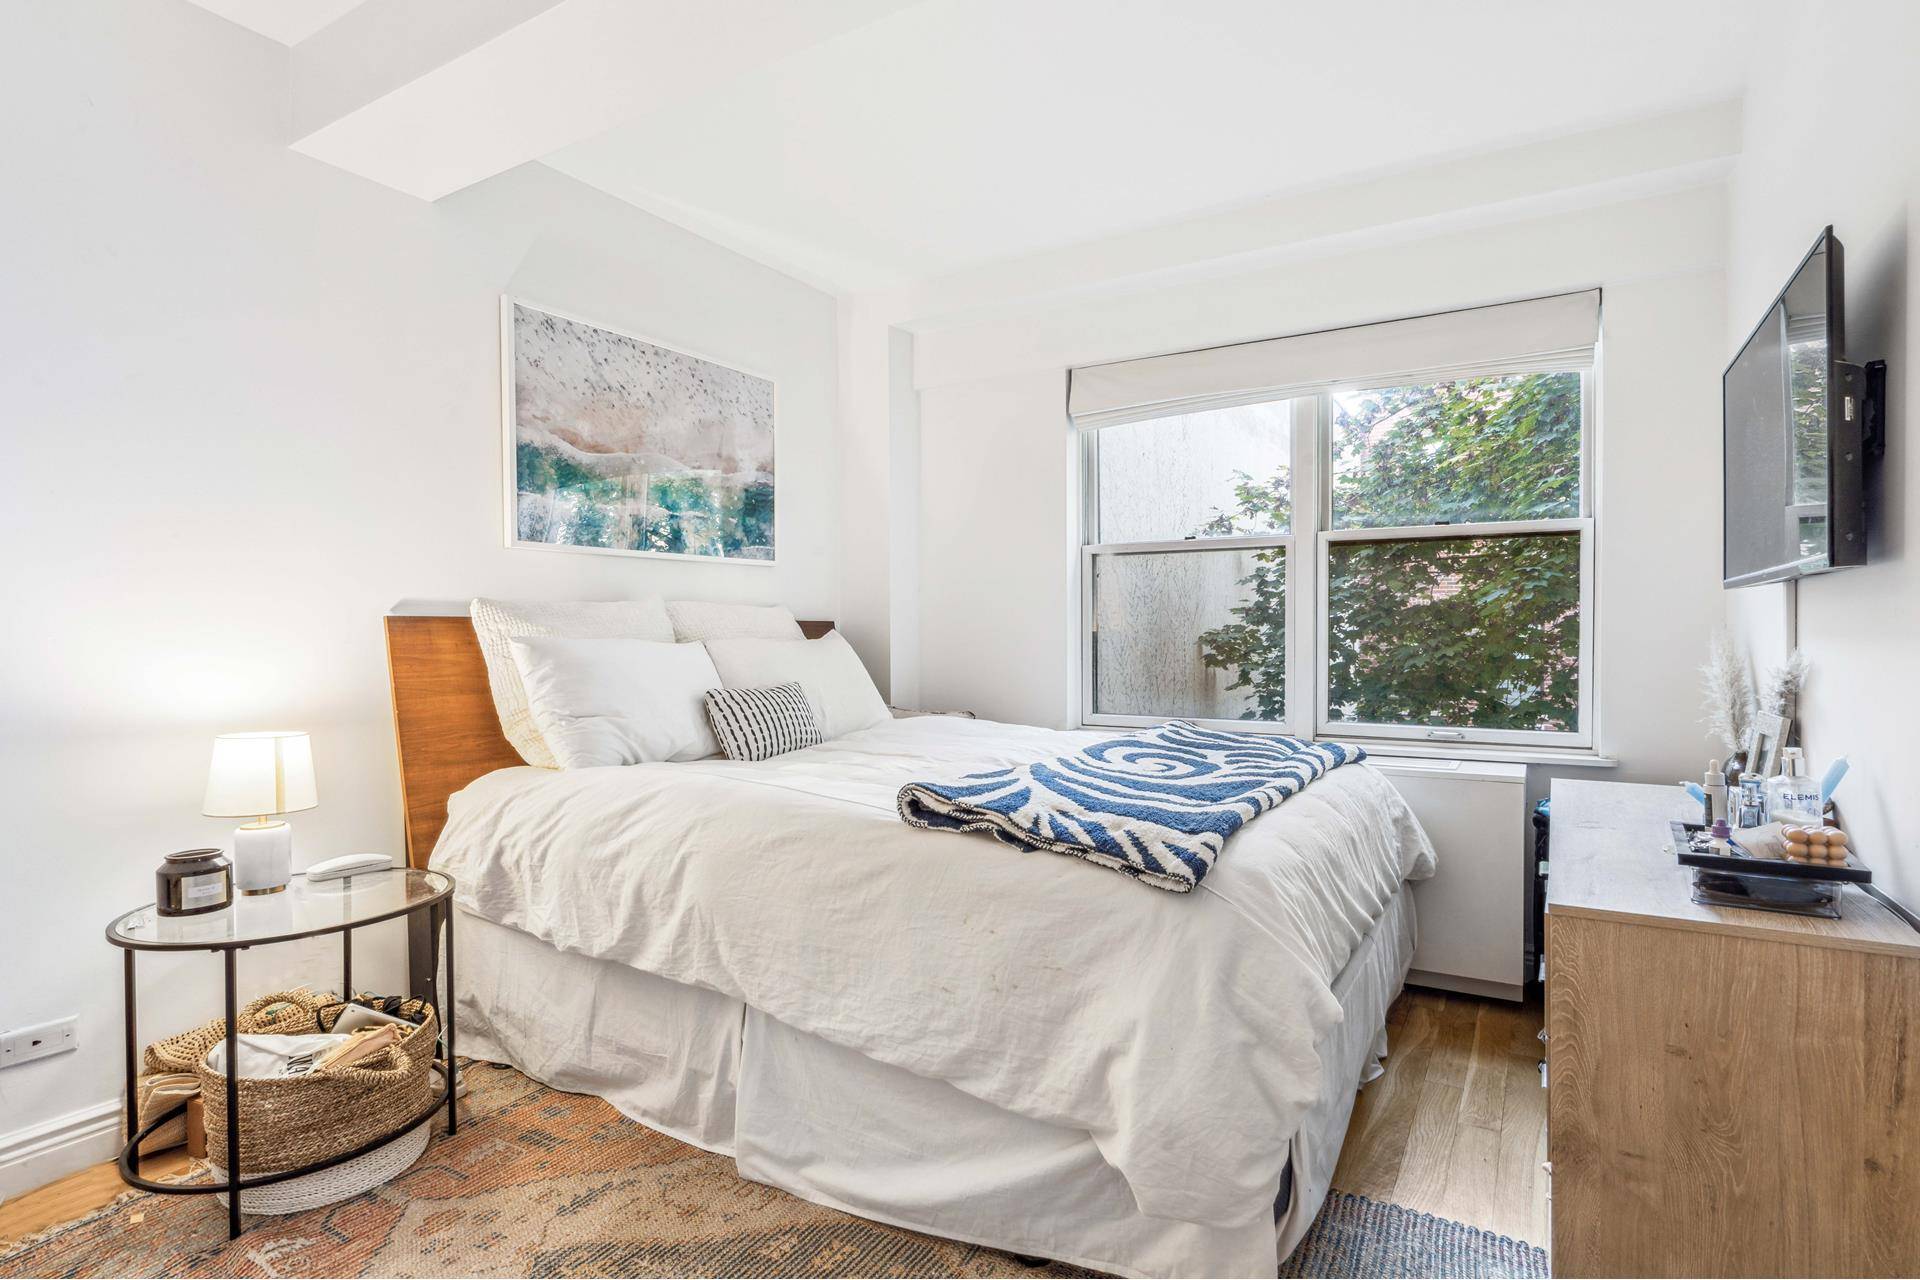 Just ReducedBest priced 2 bedroom 1 Bathroom Condo now available on the UES !